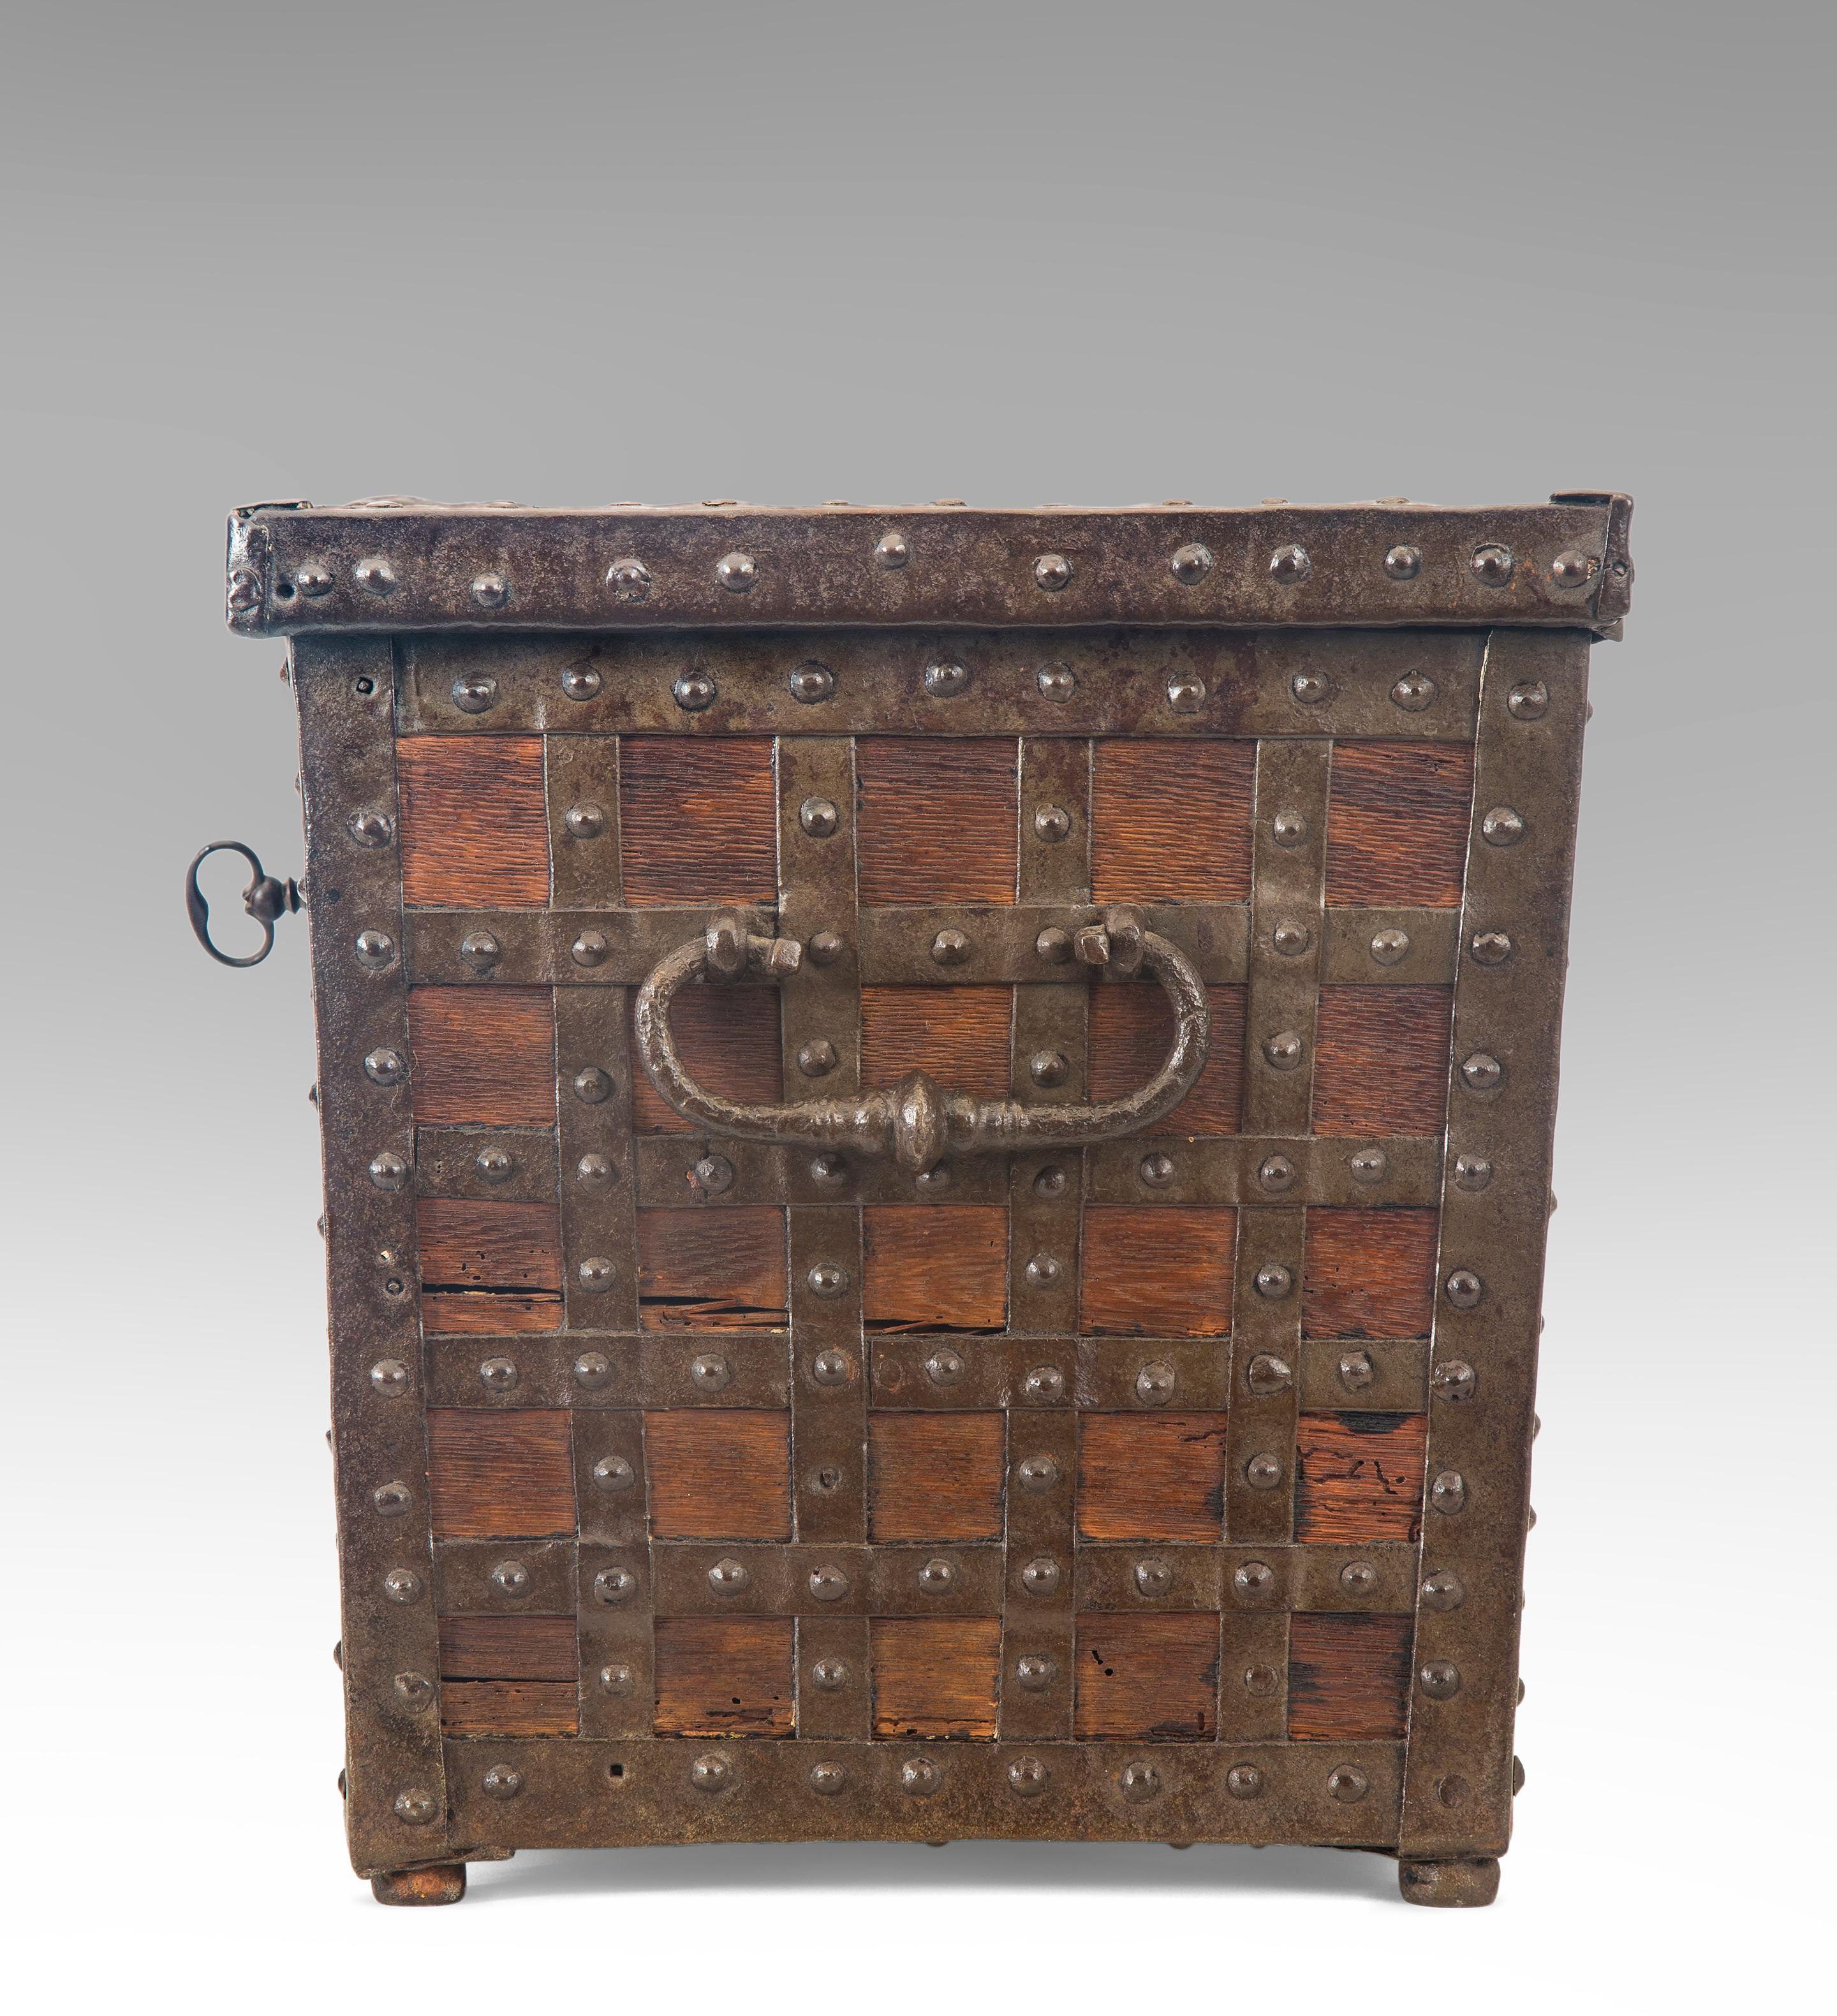 European Continental Baroque Trunk or Strong Box For Sale